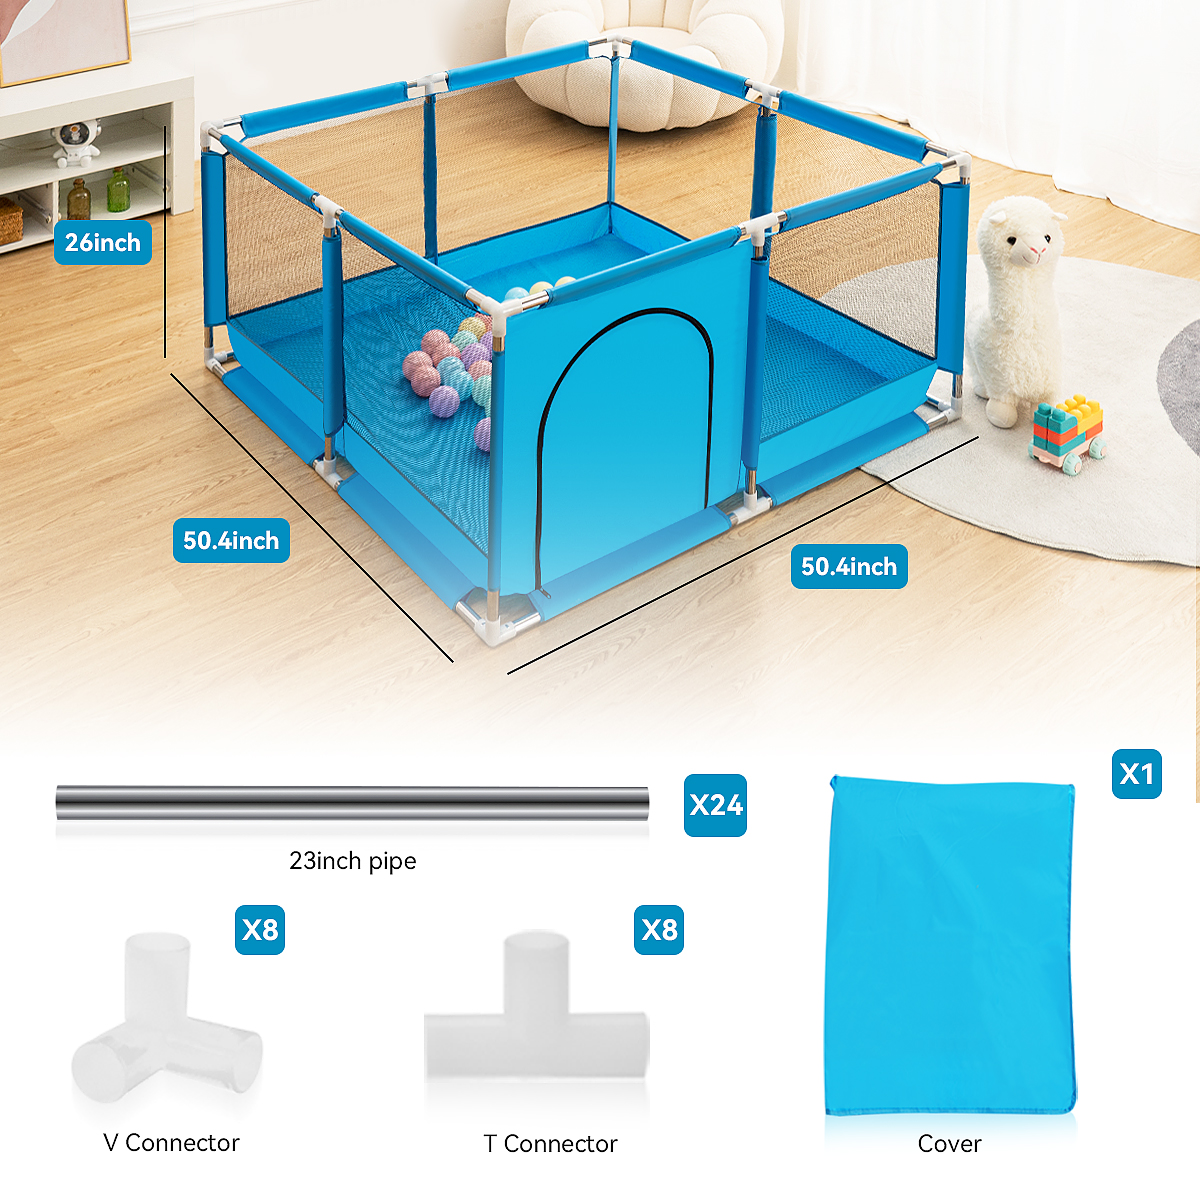 Baby Playpen,Outdoor Play Yard,Portable 4-Panel Baby Safety Playpen for Infant Toddler,Blue - image 3 of 5